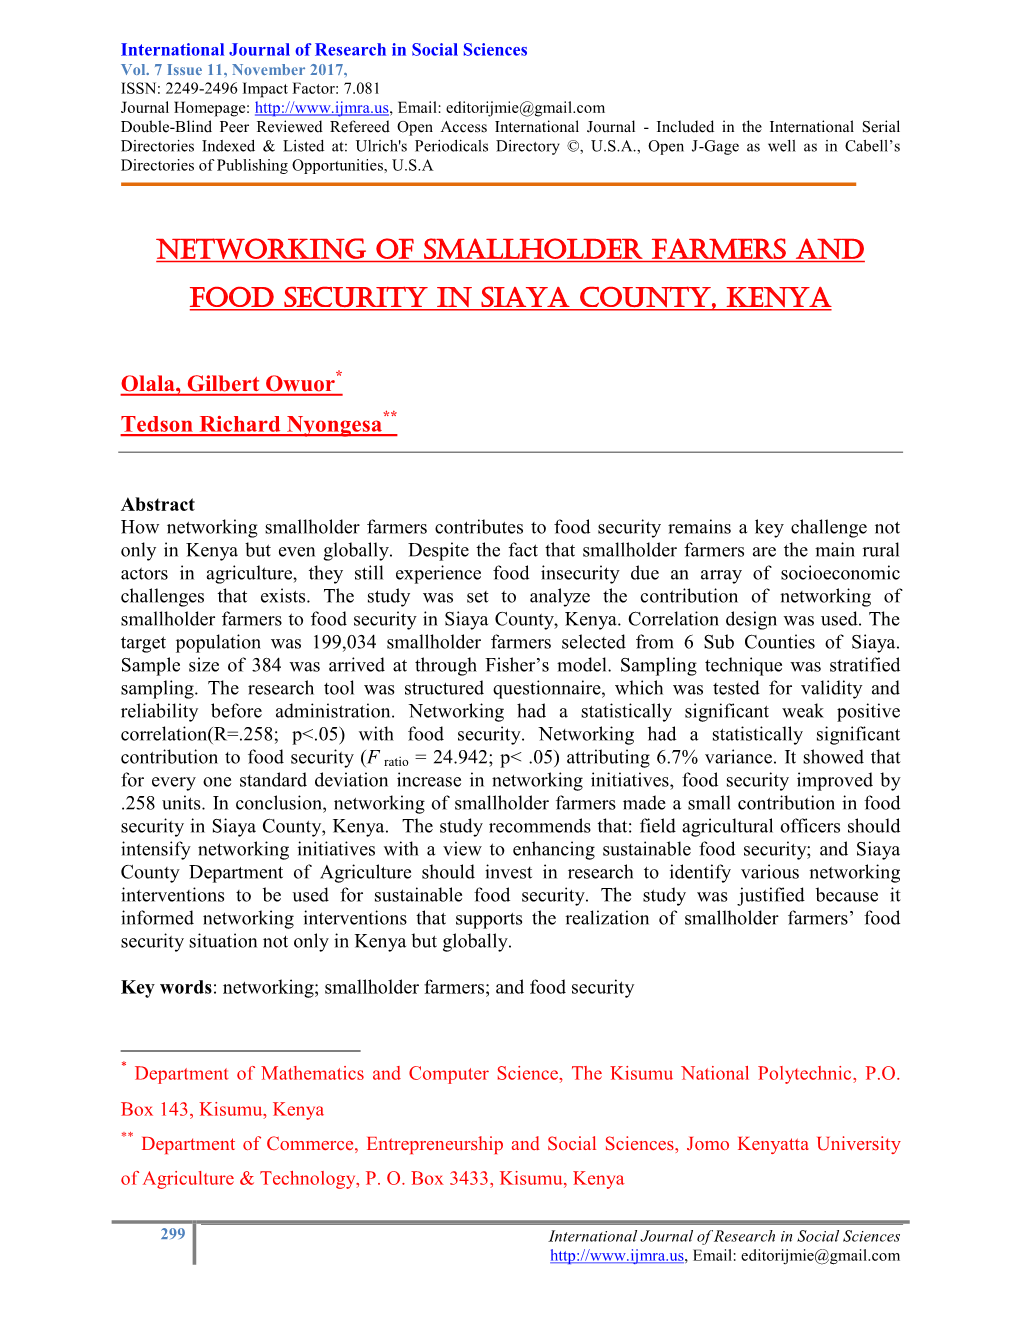 Networking of Smallholder Farmers and Food Security in Siaya County, Kenya